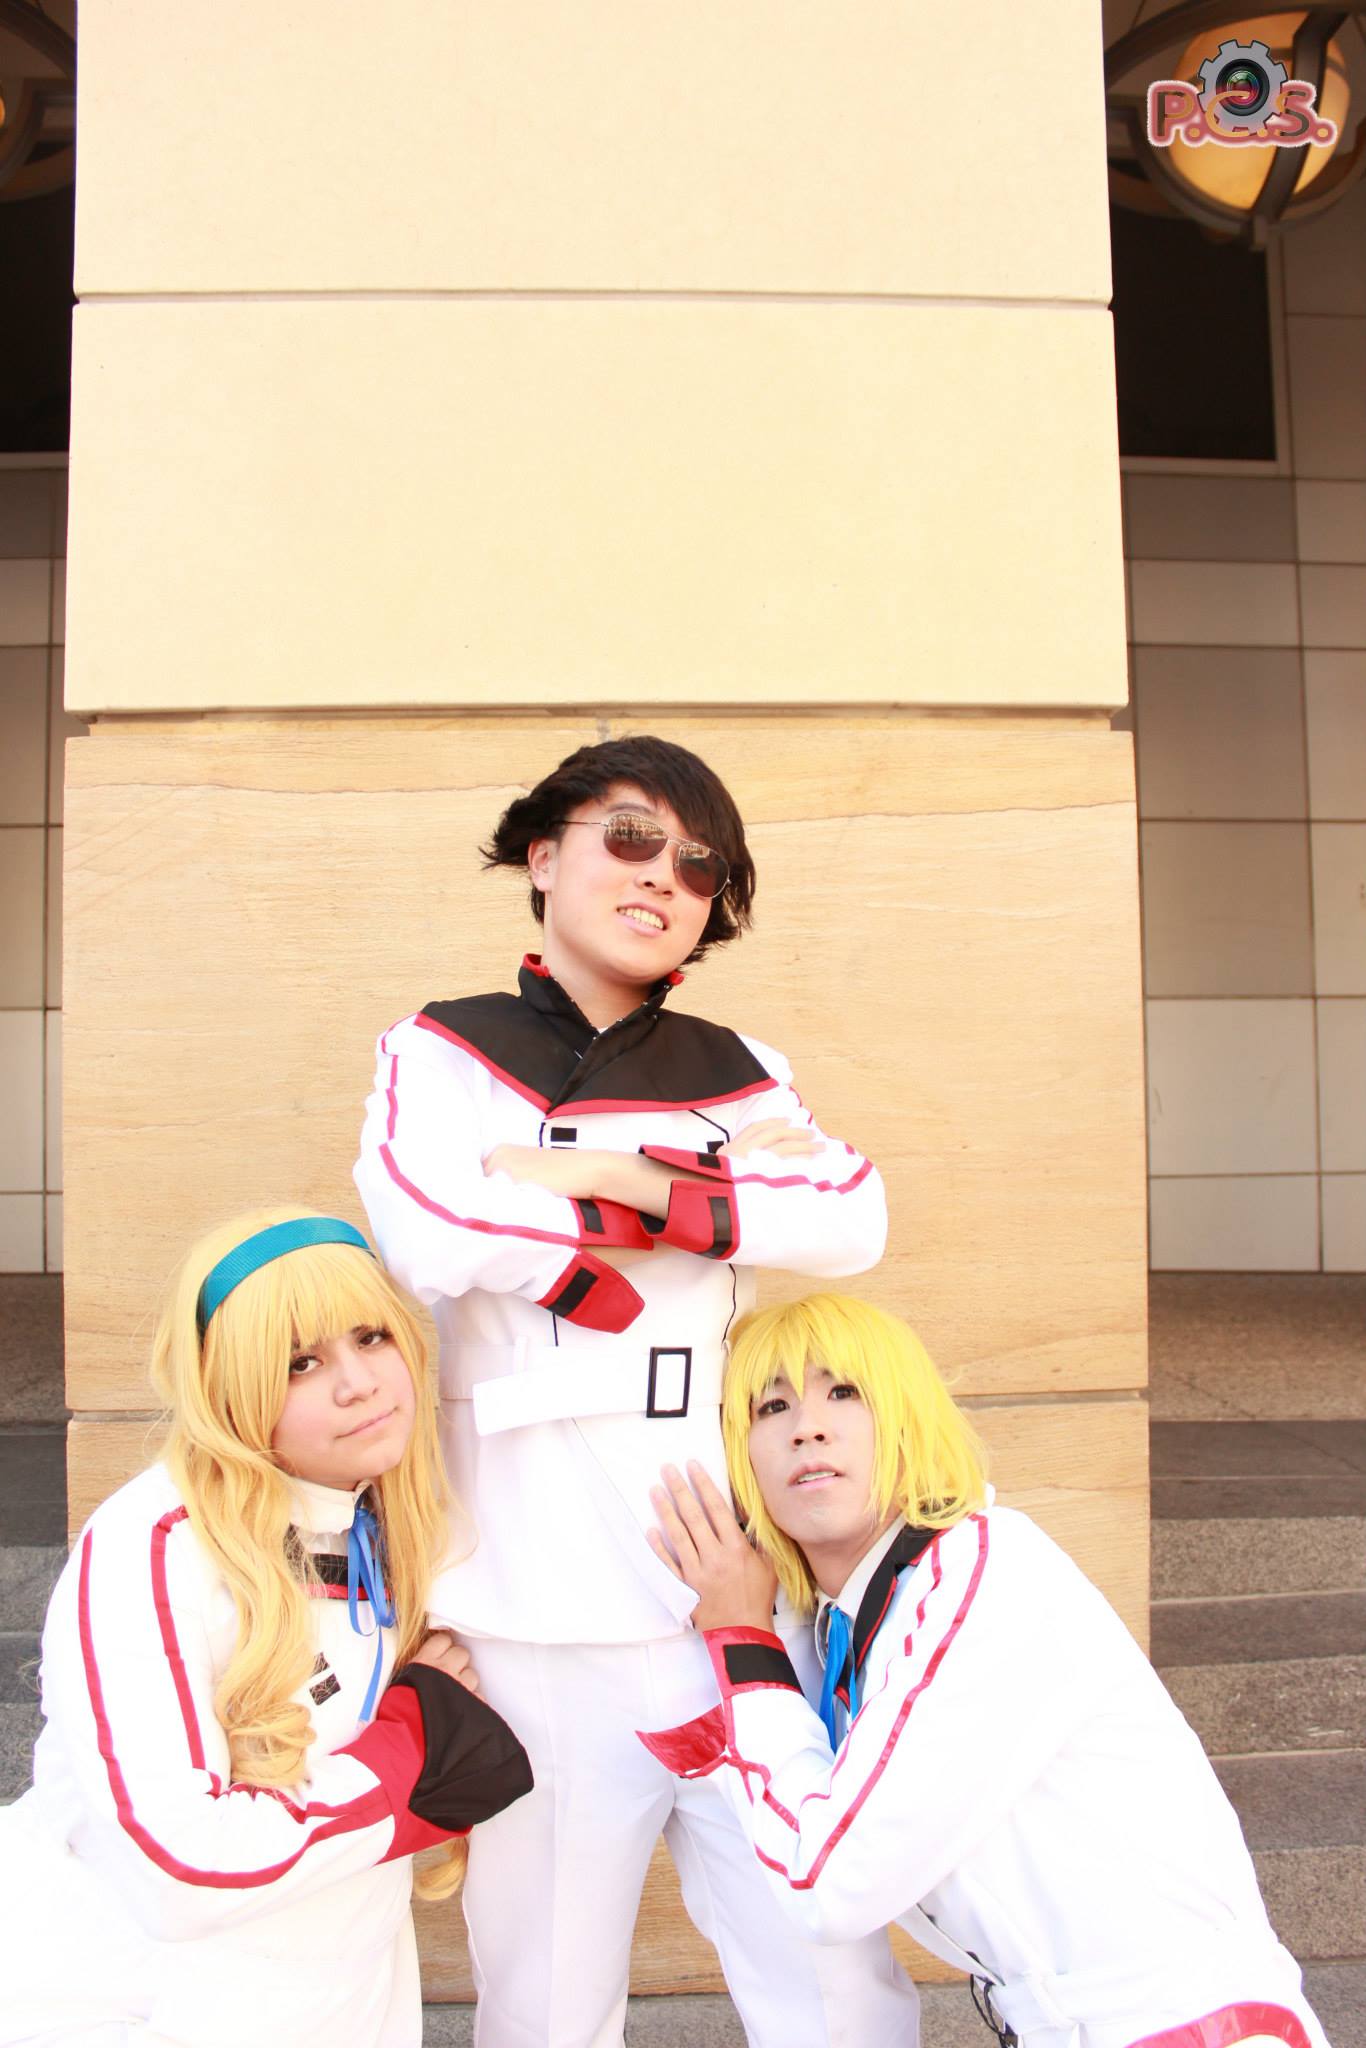 The cosplay of the uniform of Charlotte in Infinite Stratos